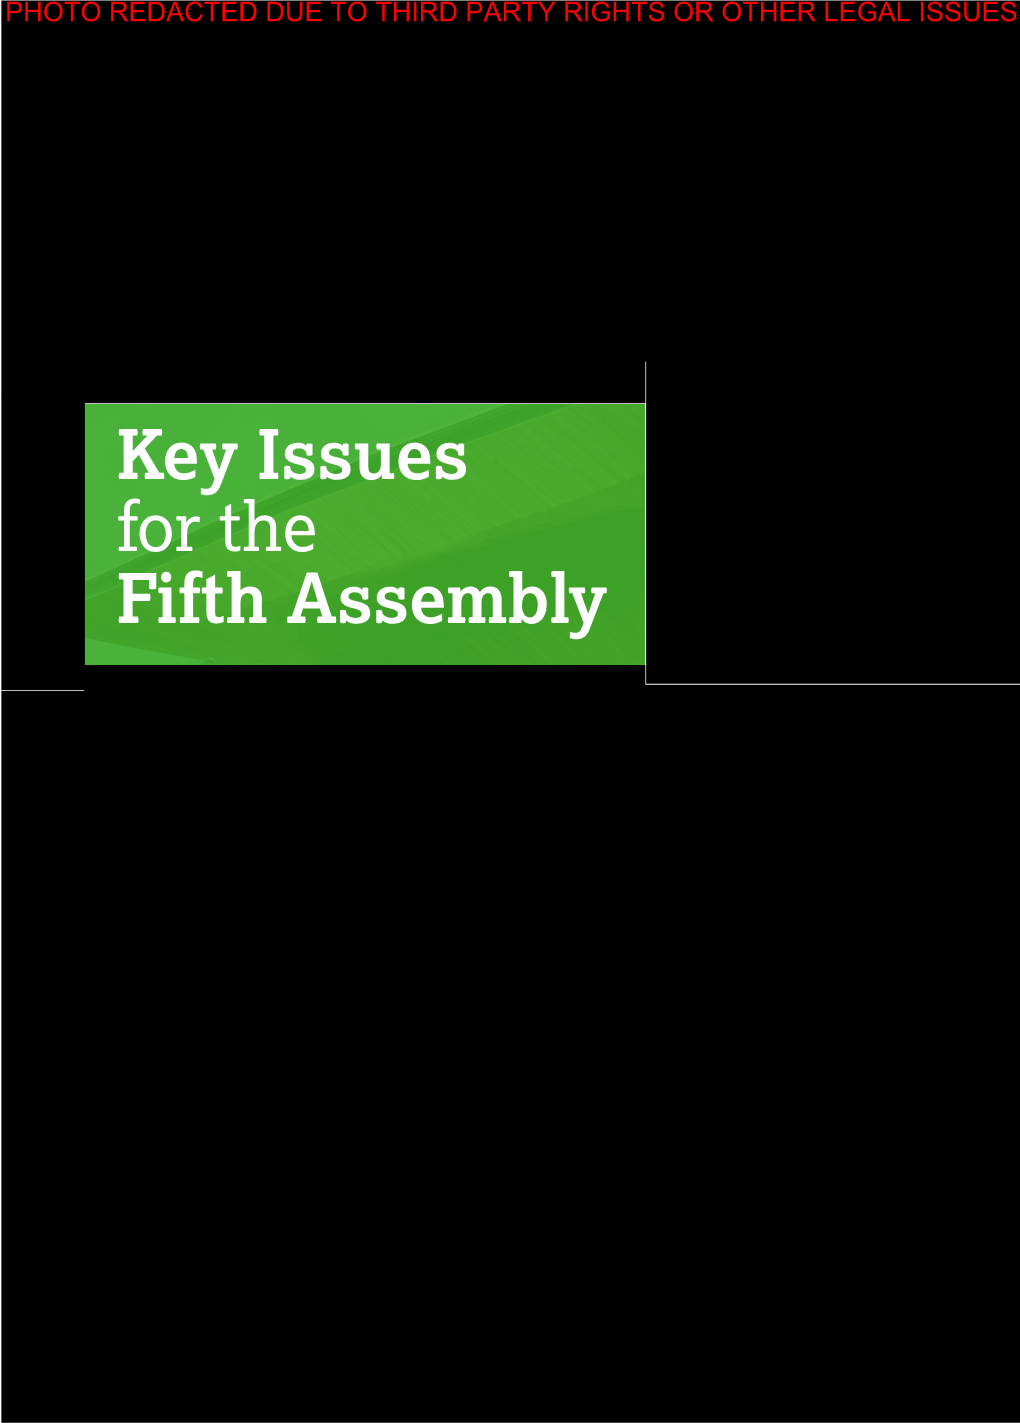 Key Issues for the Fifth Assembly